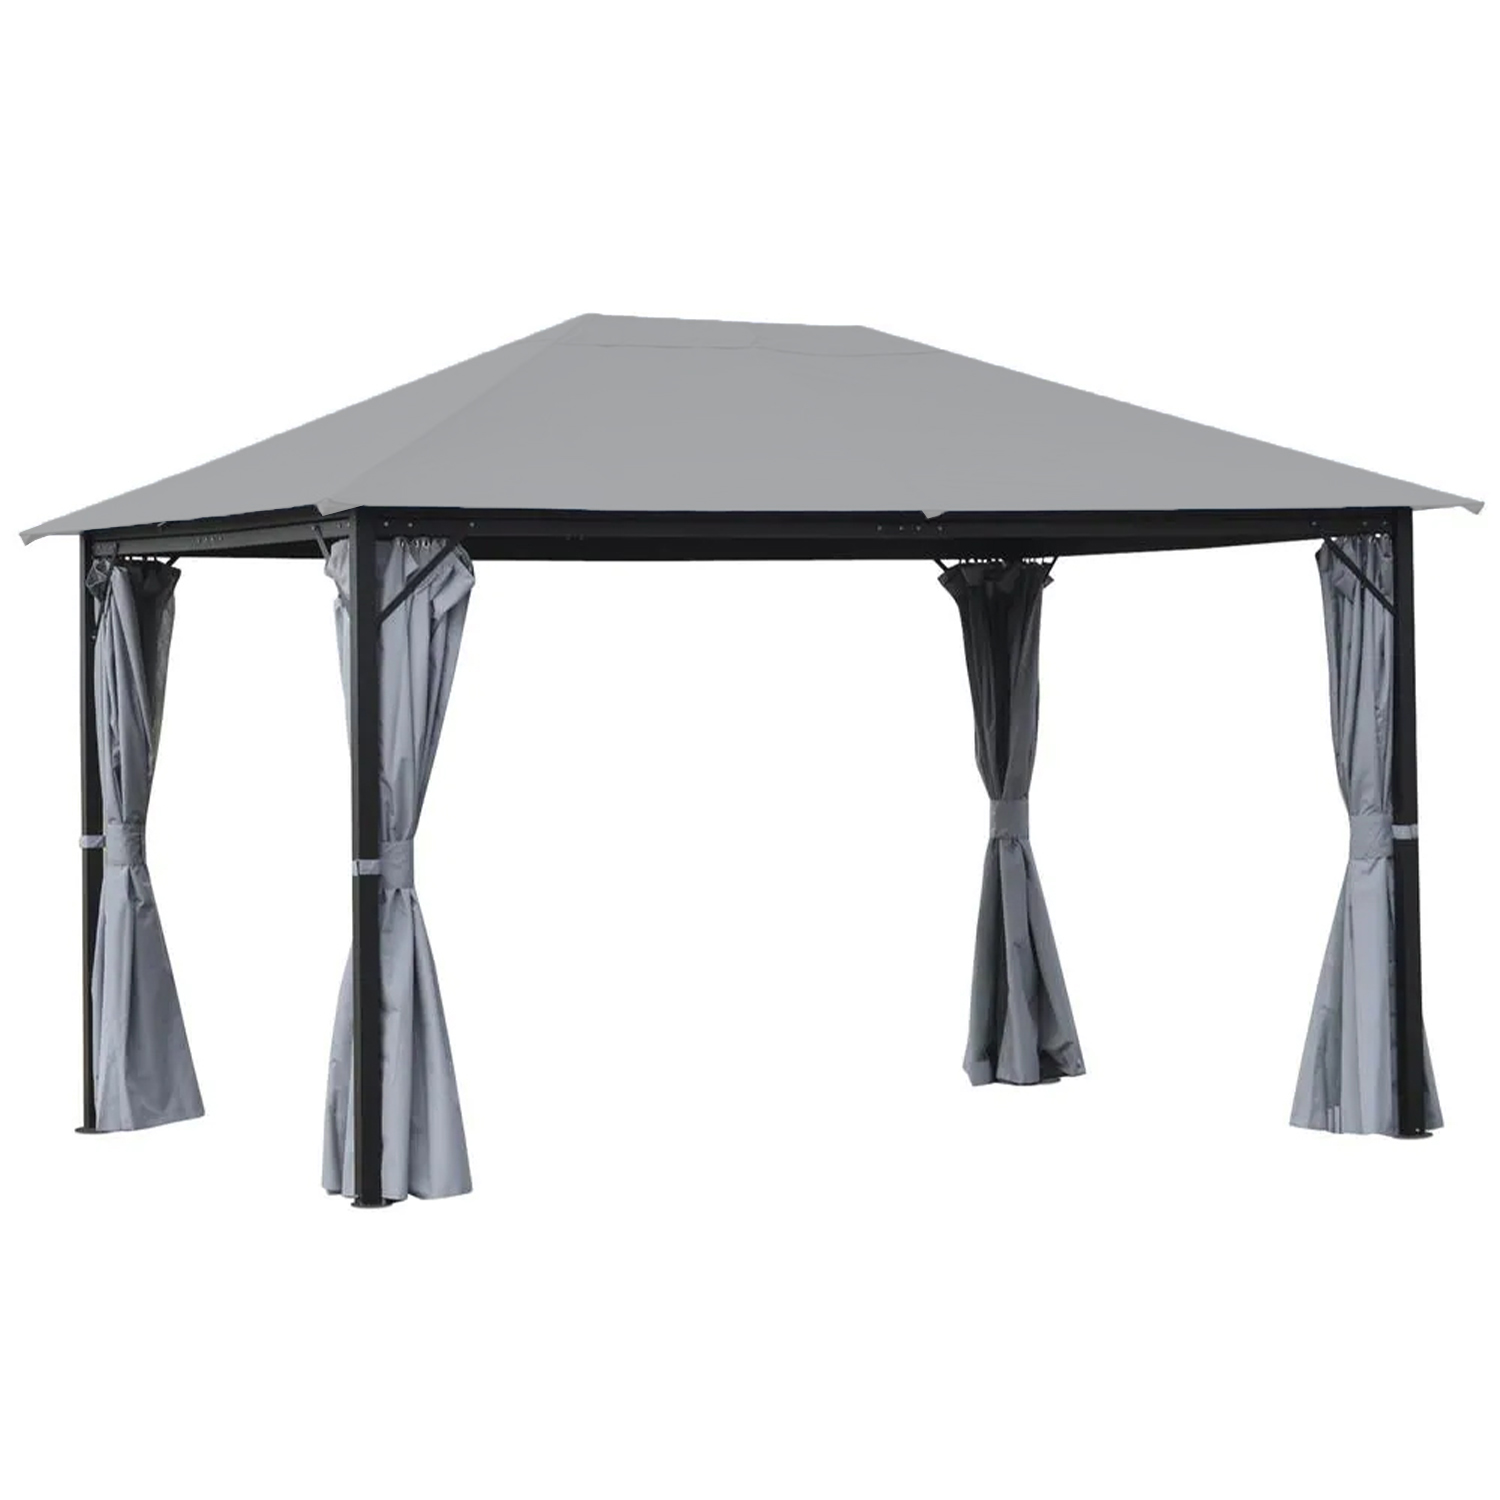 Replacement Canopy for 84C-188V01GY and 84C-188V01 Gazebo - Ripl